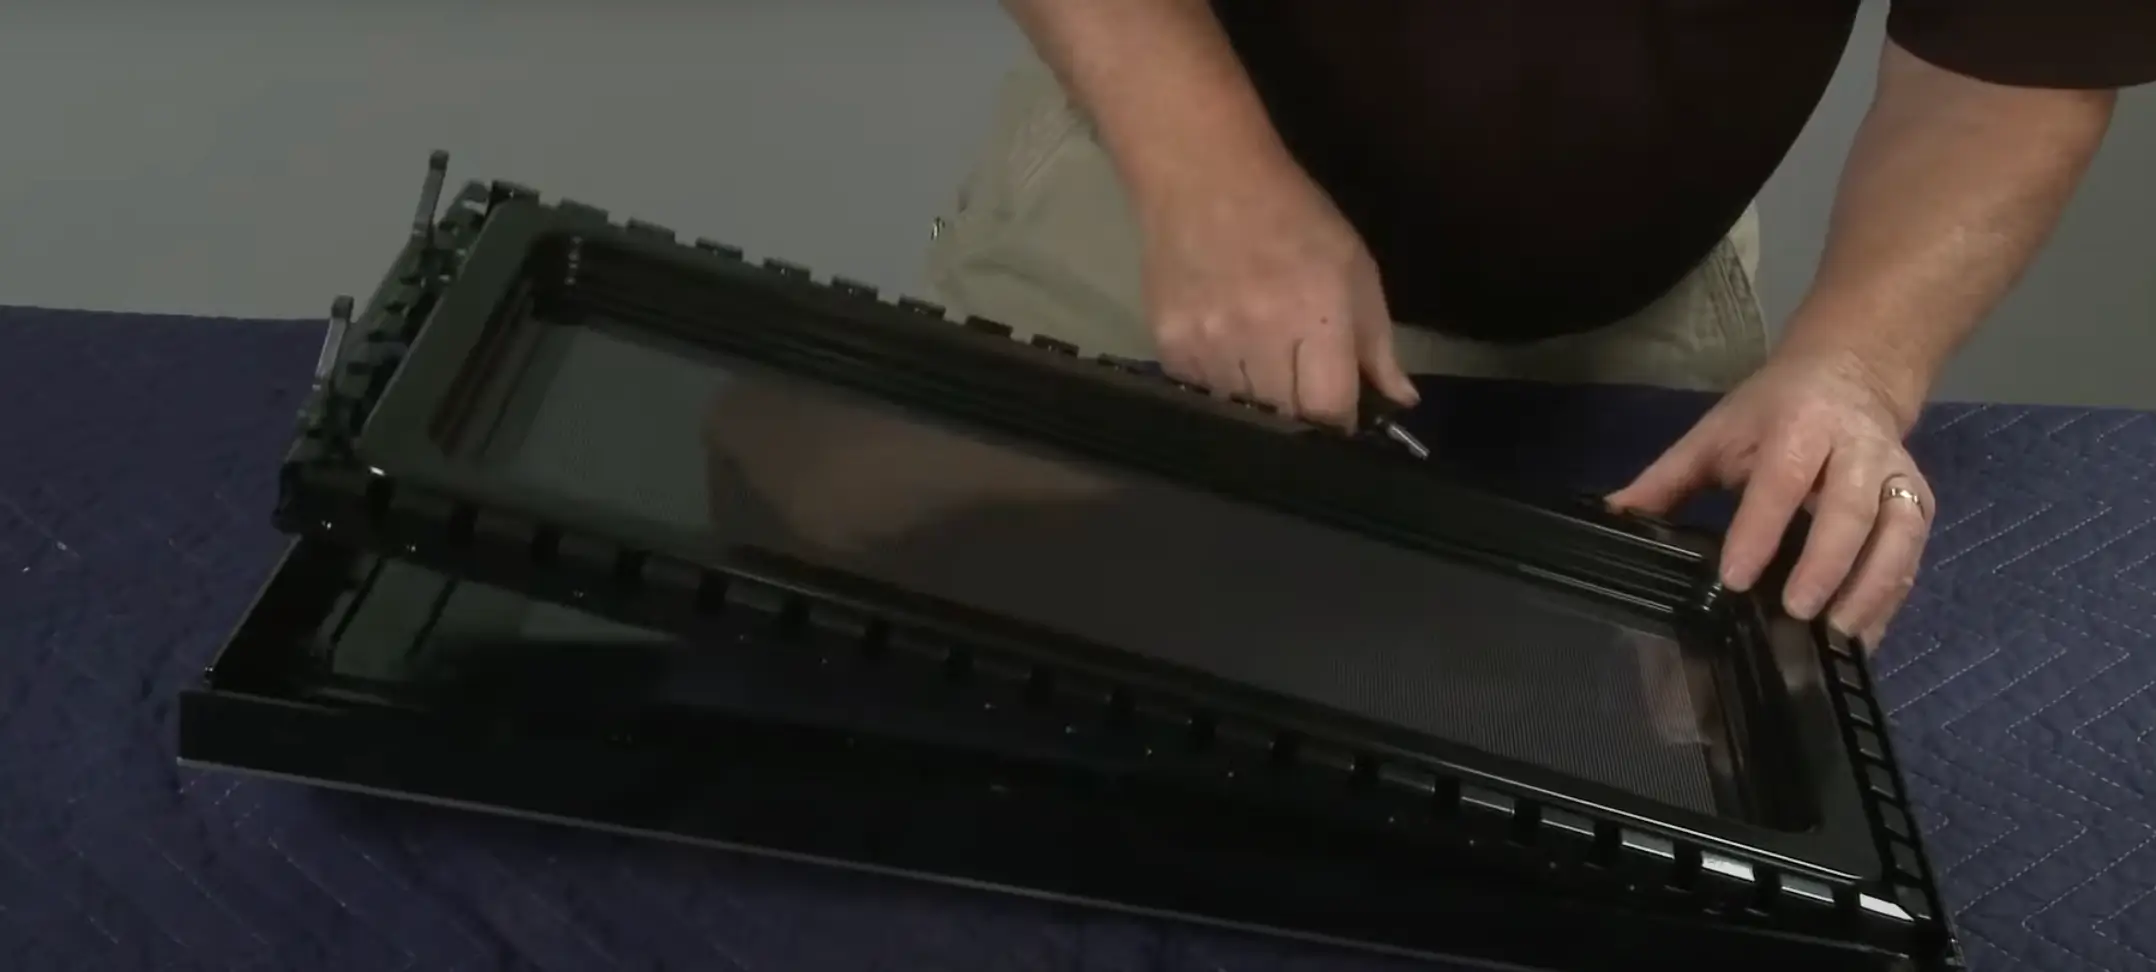 Image of Hands attaching a replacement microwave door by screwing in the hinges.